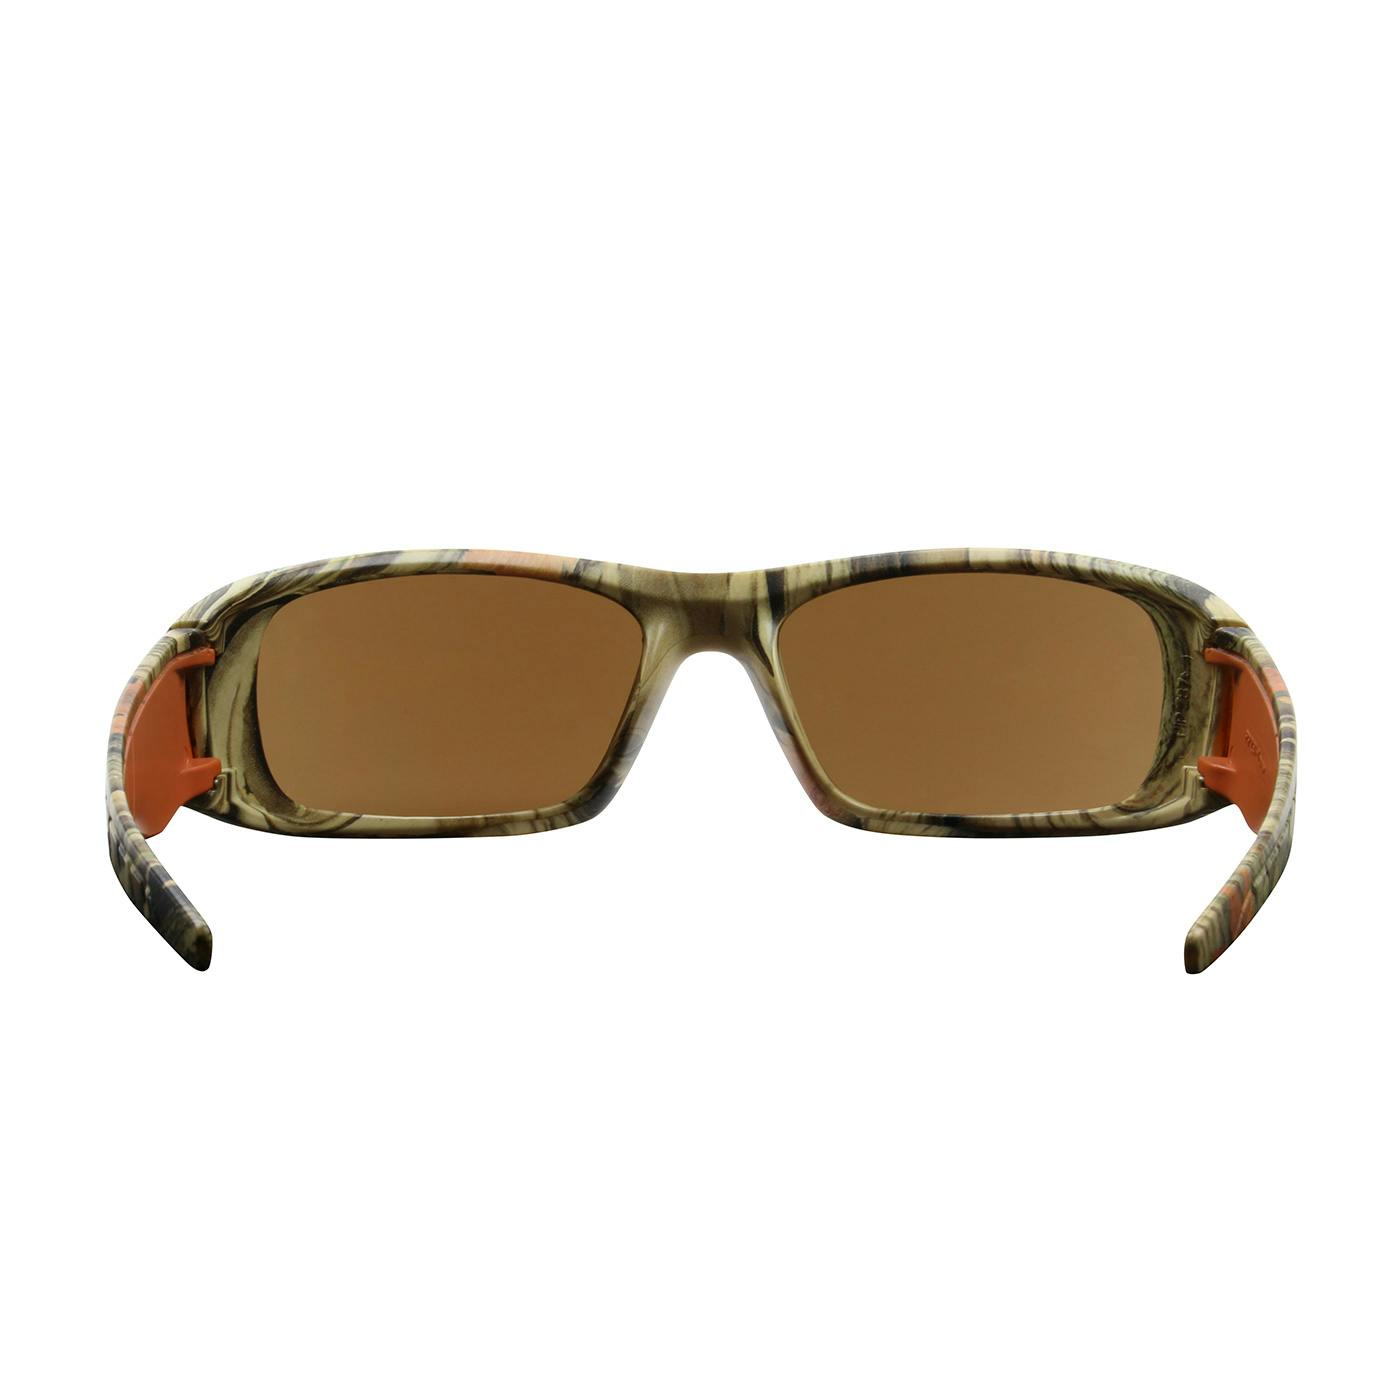 Full Frame Safety Glasses with Camouflage Frame, Brown Lens and Anti-Scratch / Anti-Fog Coating, Camouflage (250-53-1024) - OS_0